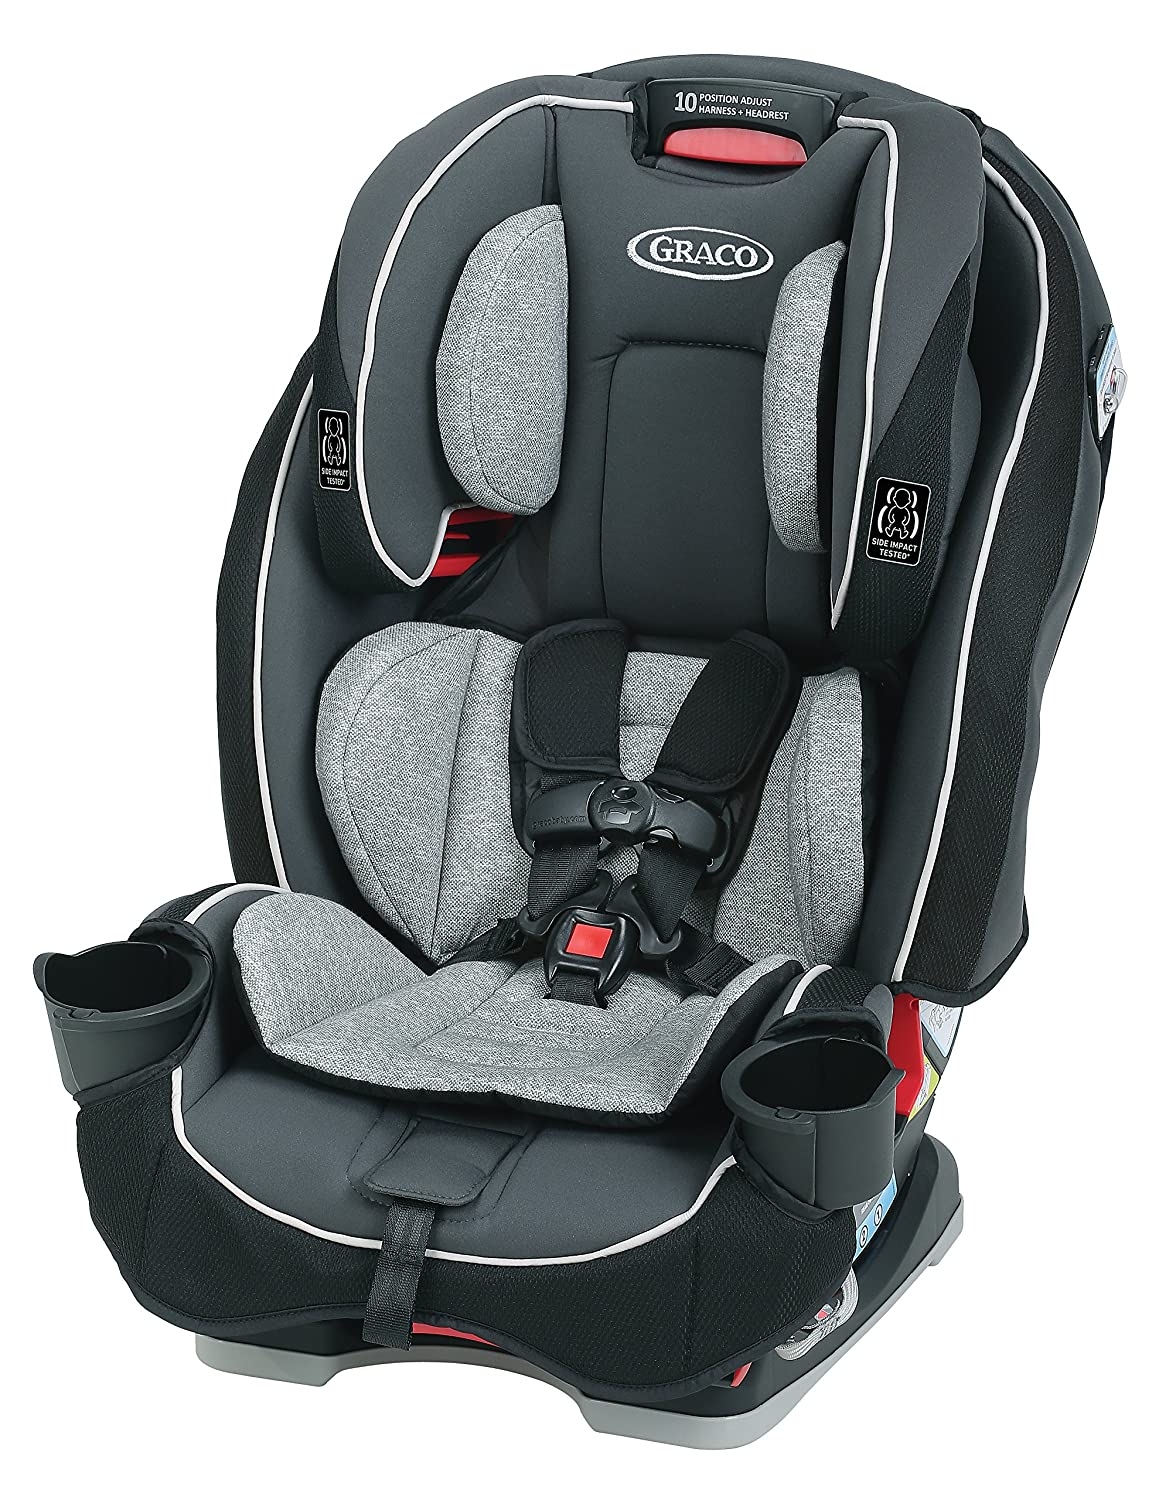 amazon-prime-day-graco-slimfit-3-in-1-convertible-car-seat-infant-to